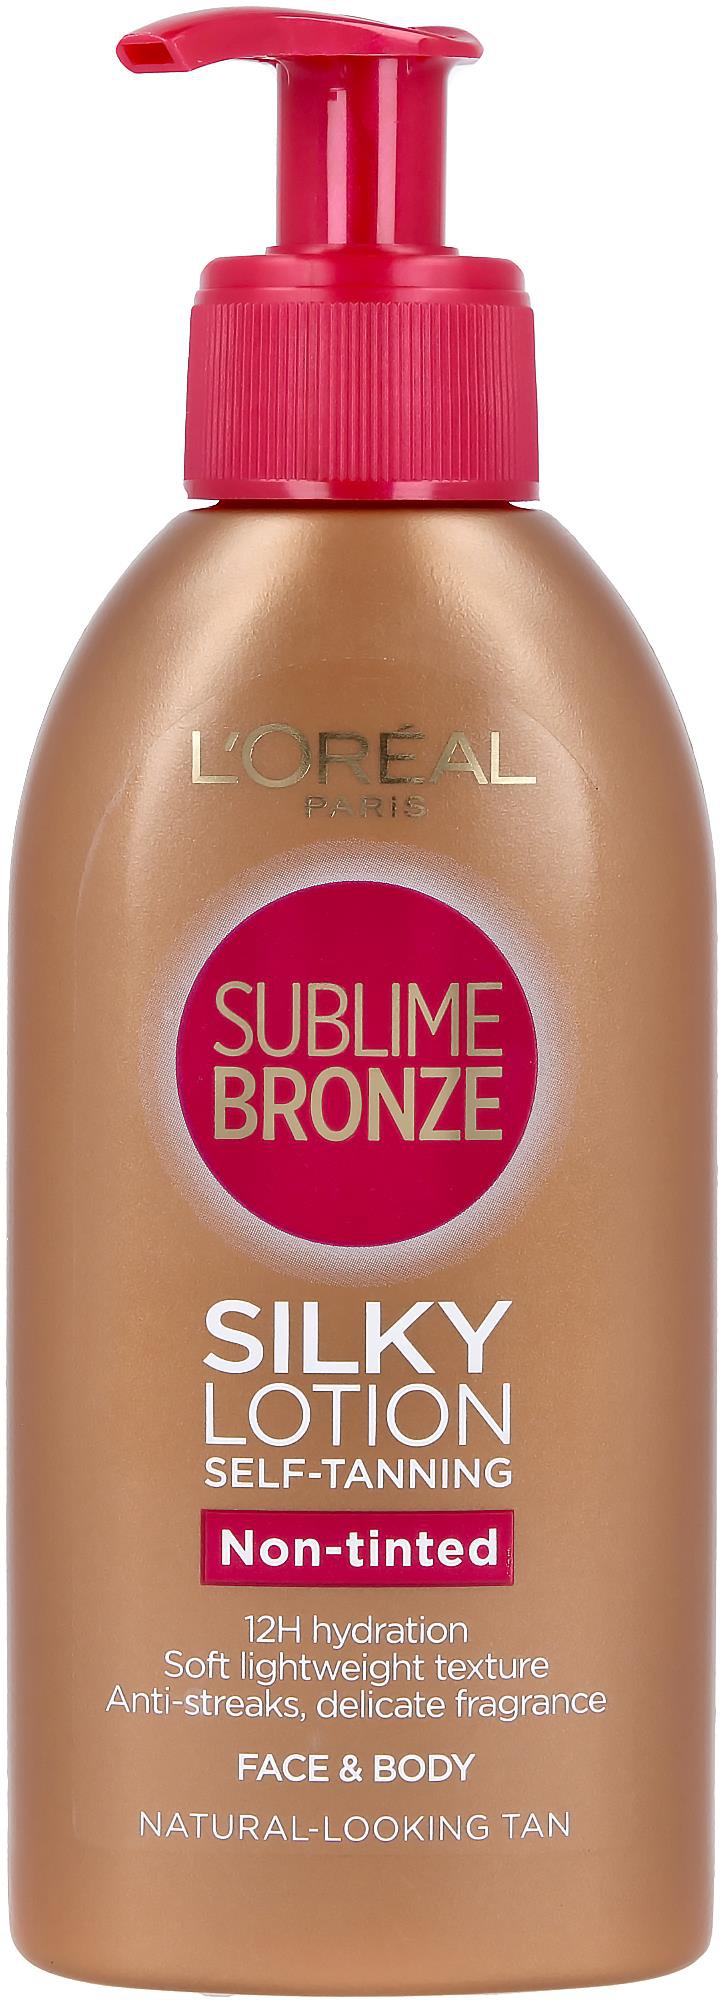 L'Oreal Sublime Bronze Silky Lotion